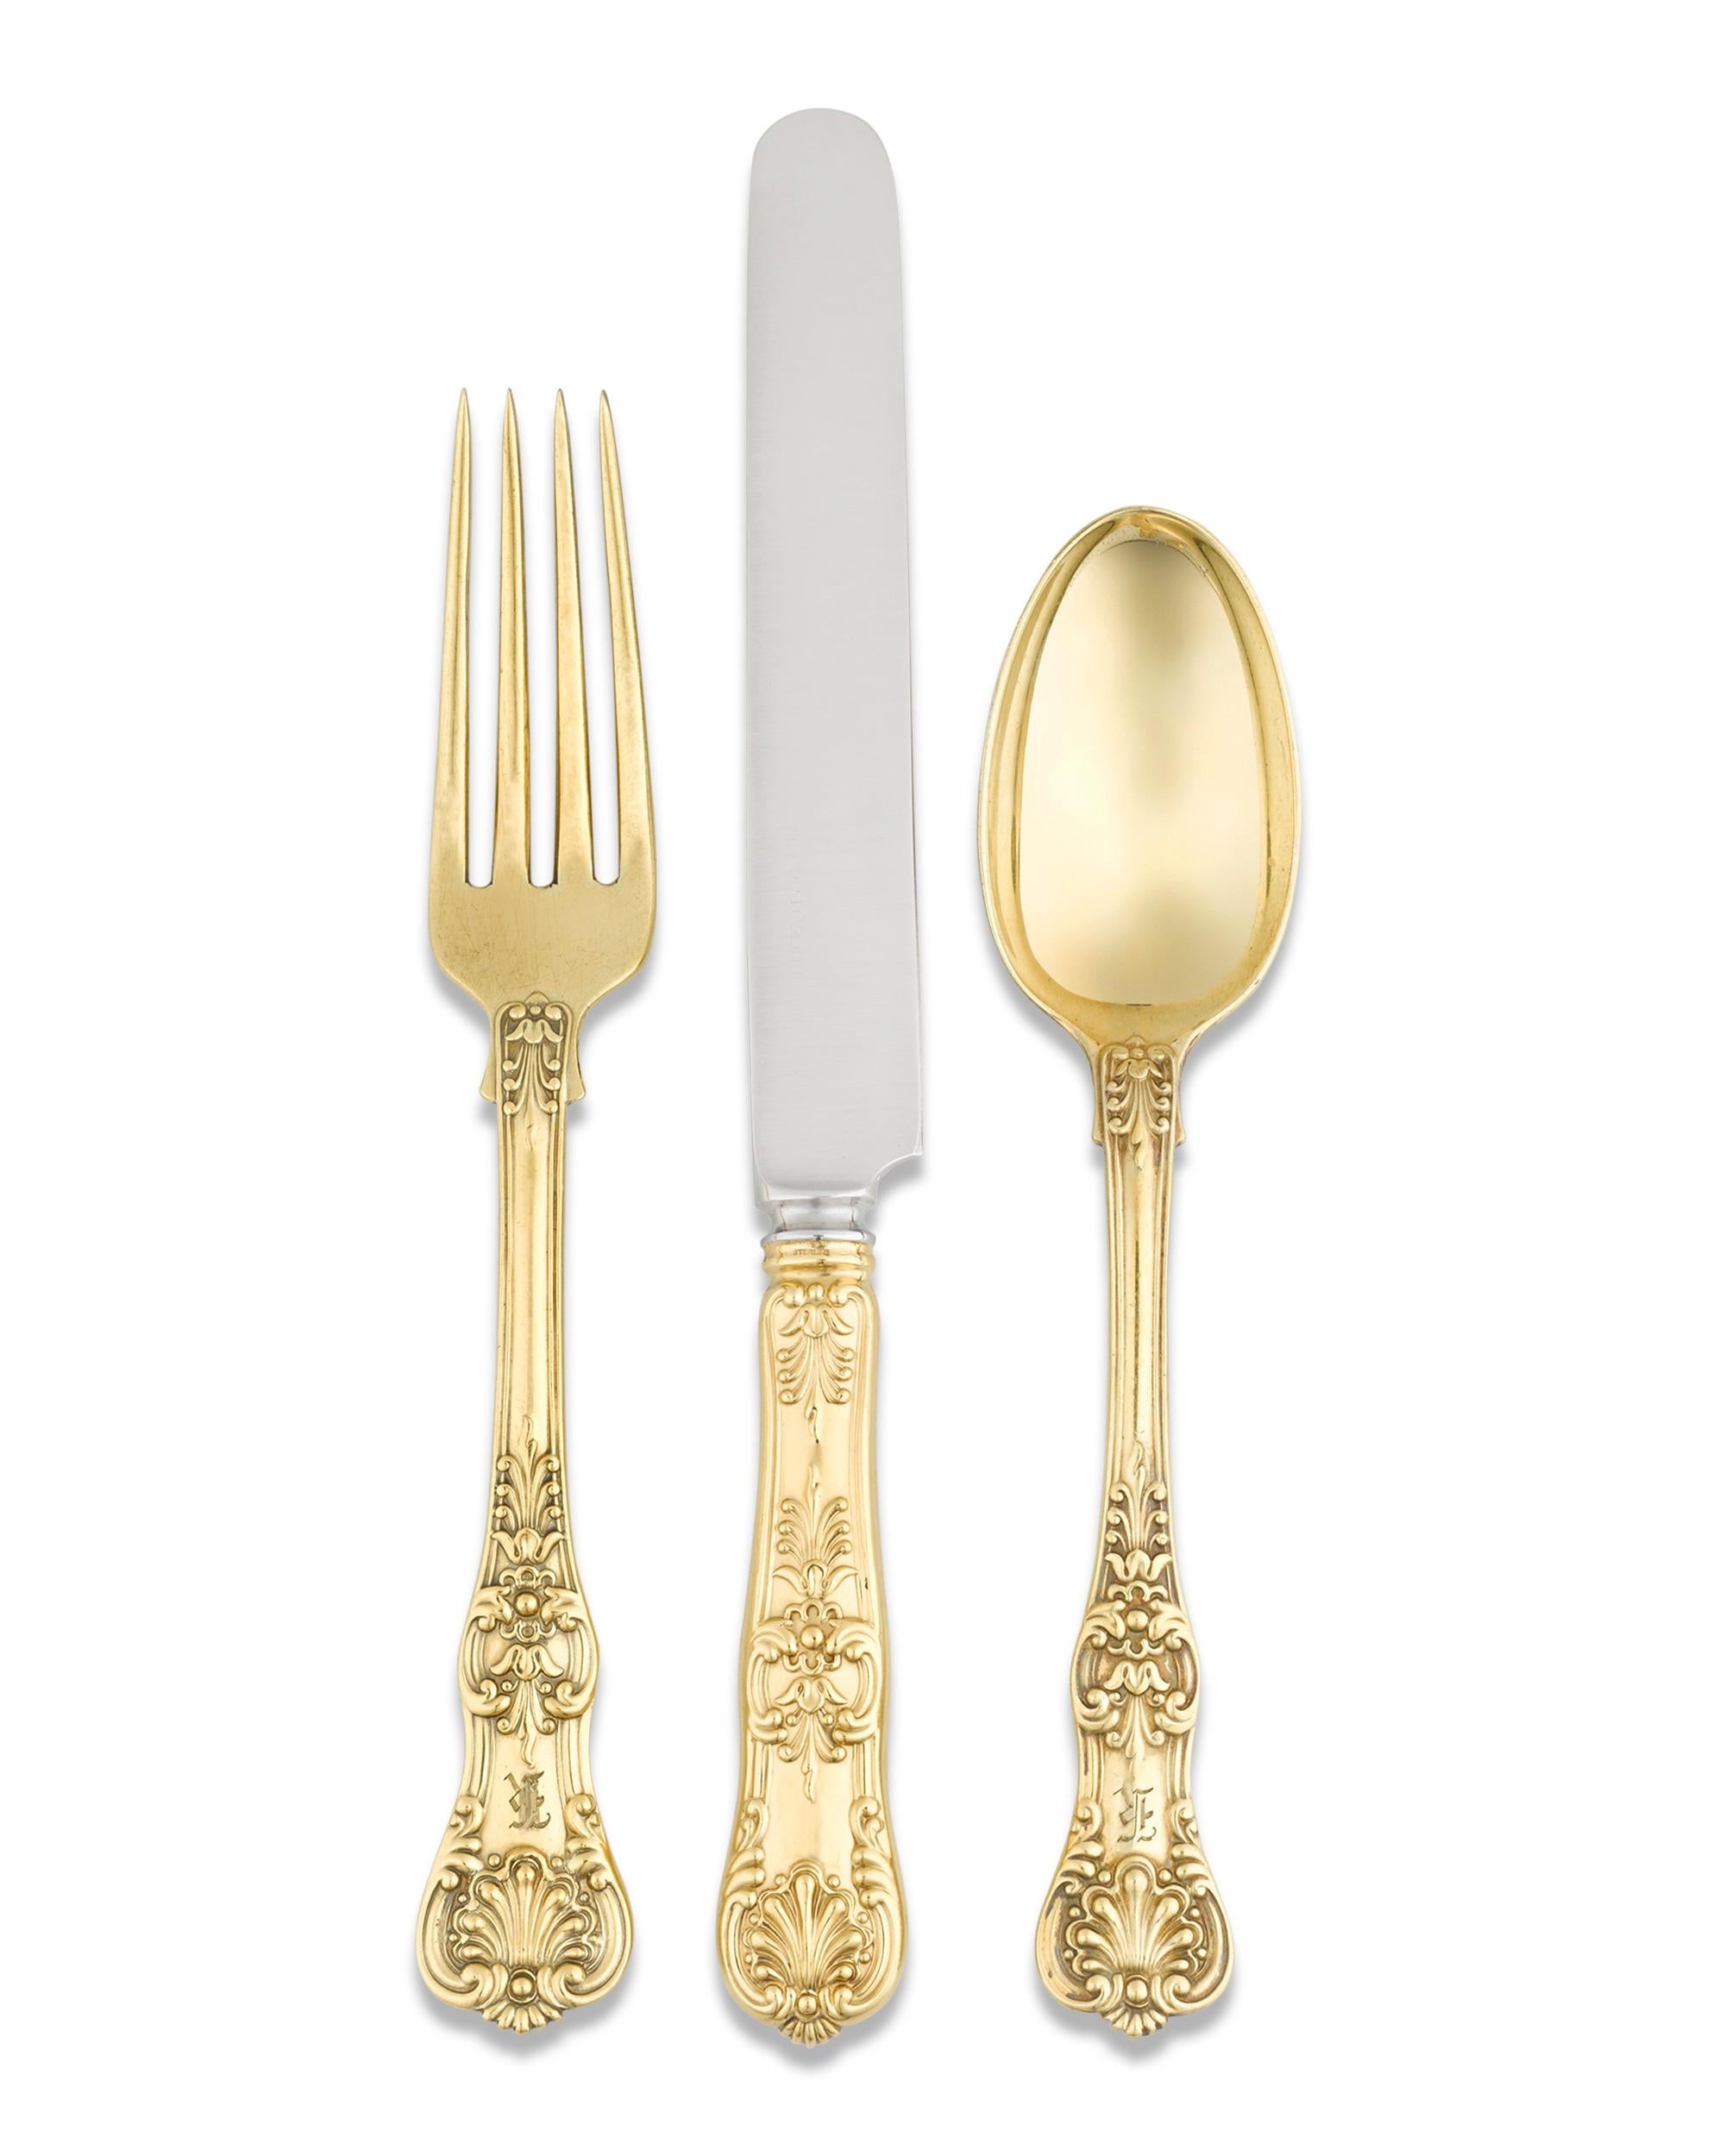 Sterling Silver Tiffany & Co.'s English King Gilded Flatware Service, 251 Pieces